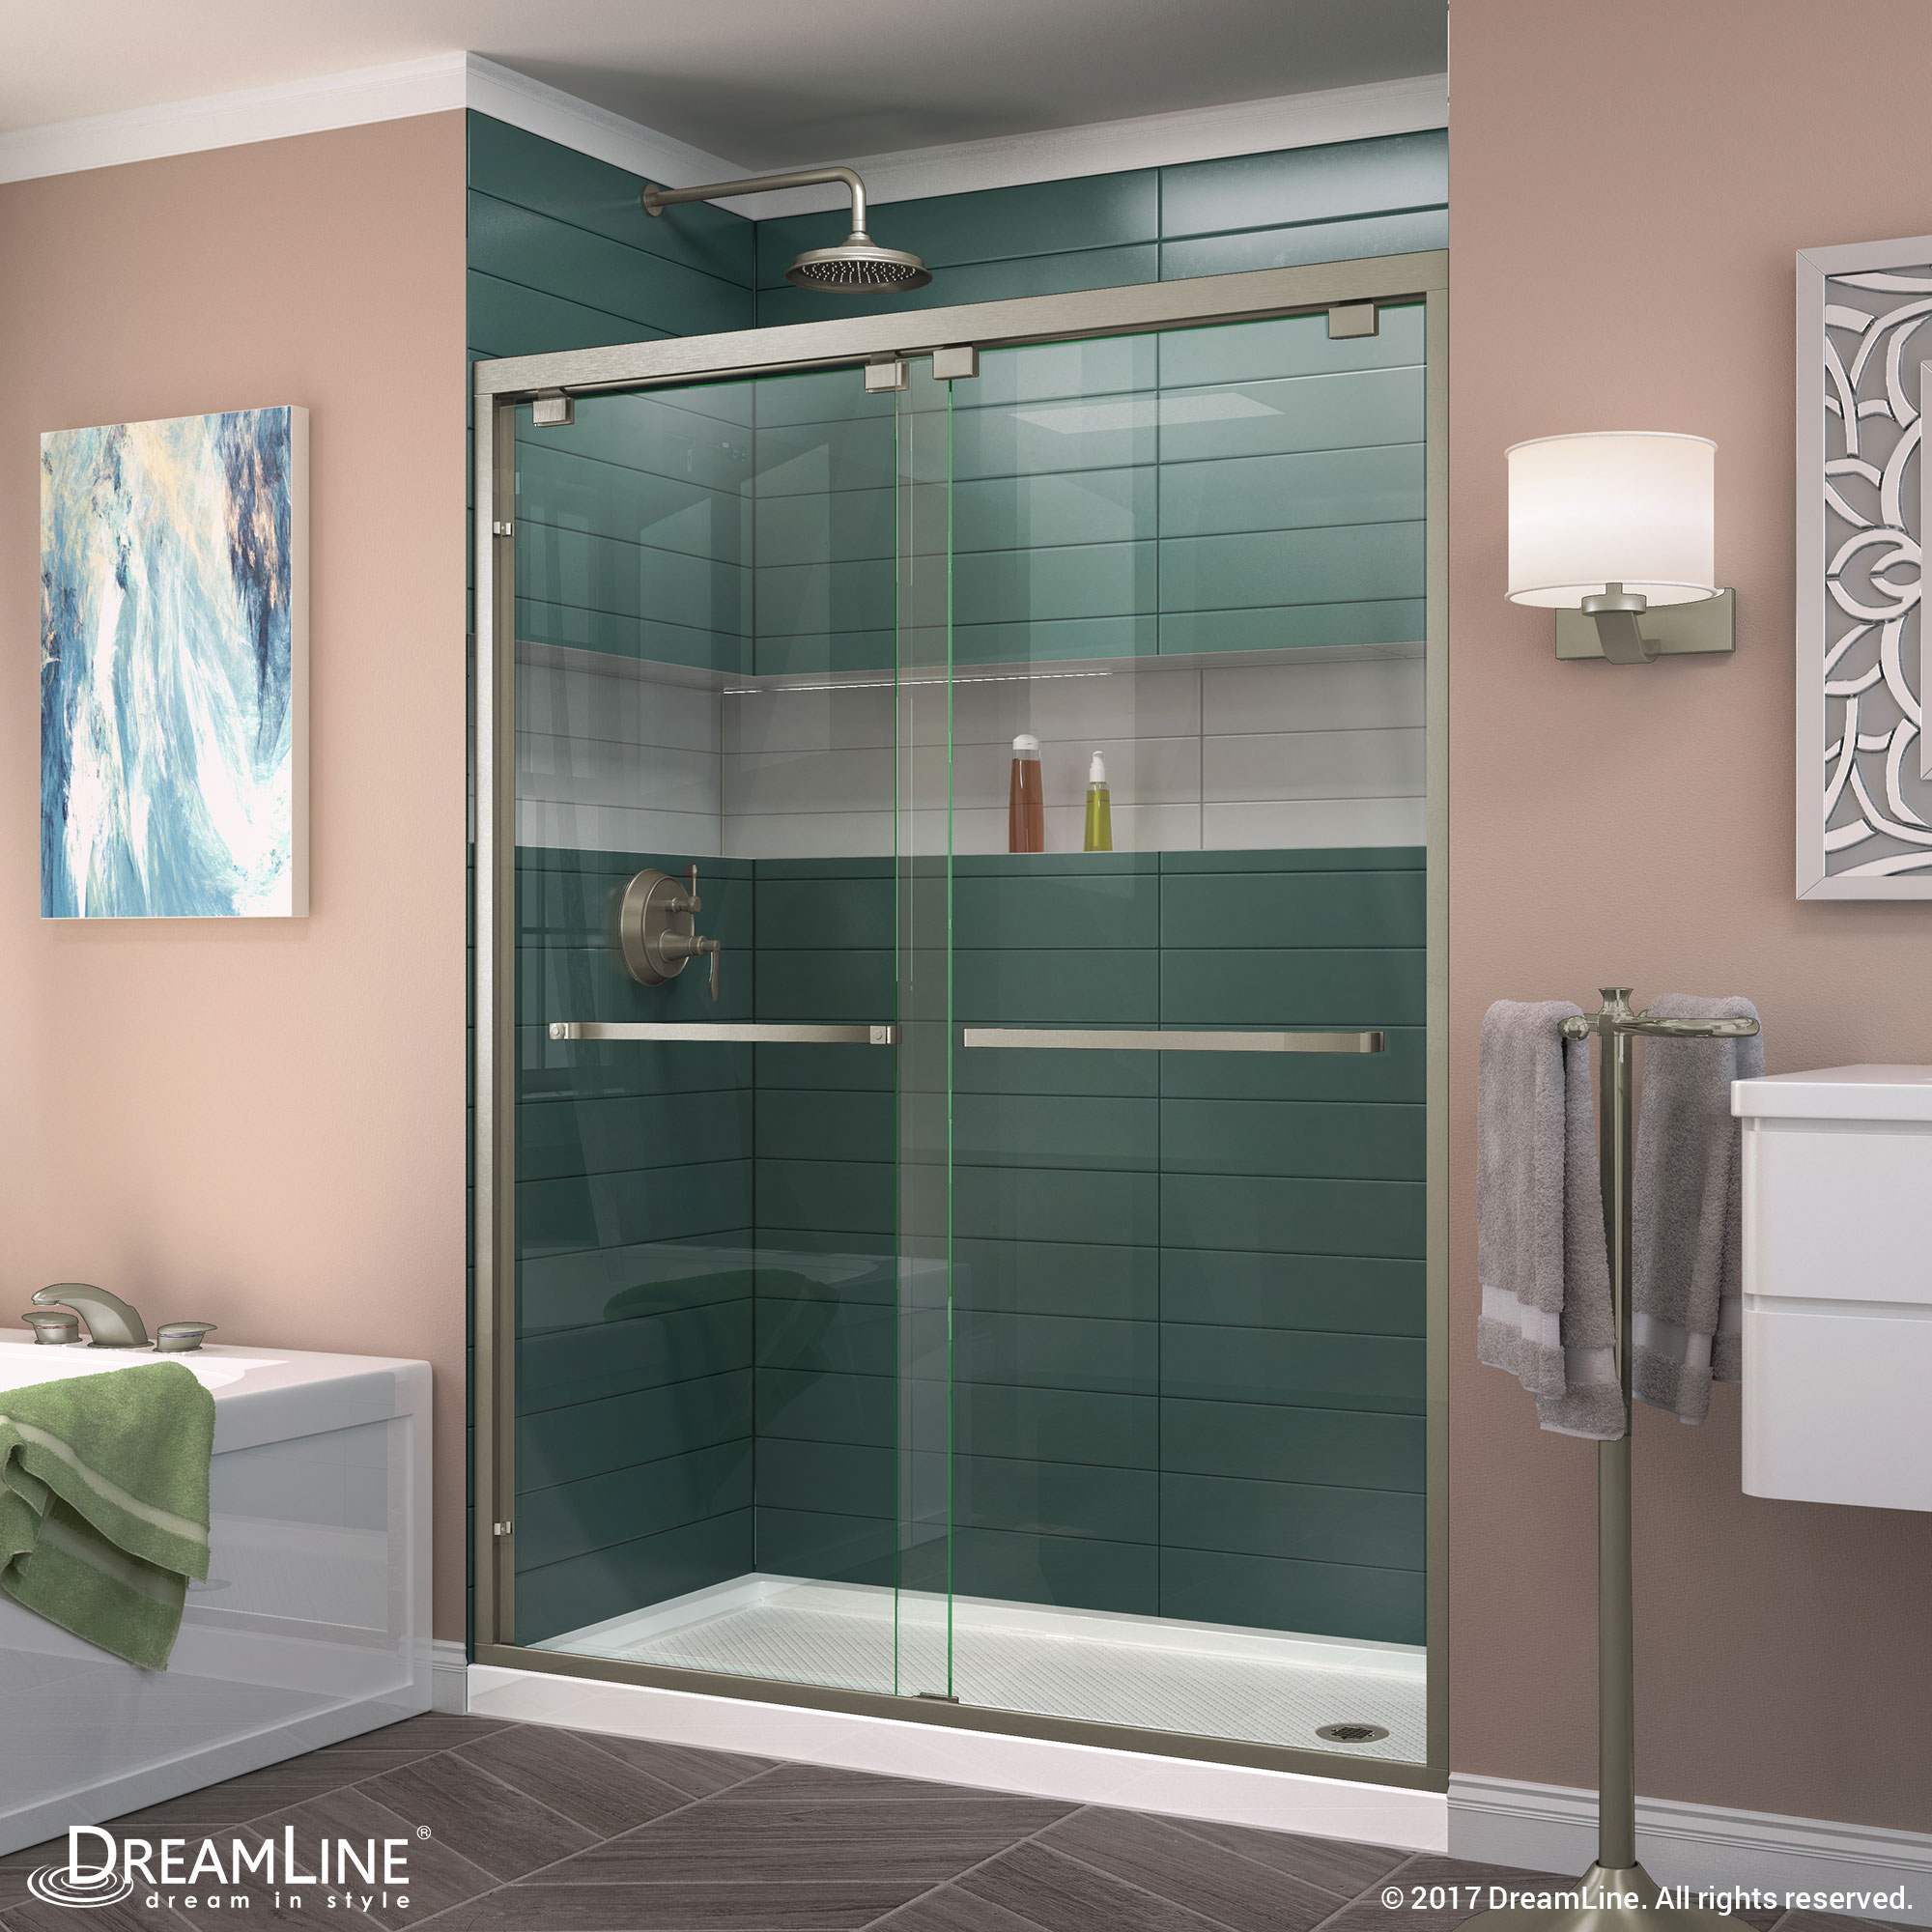 DreamLine Encore 34 in. D x 60 in. W x 78 3/4 in. H Bypass Shower Door in Chrome and Right Drain White Base Kit